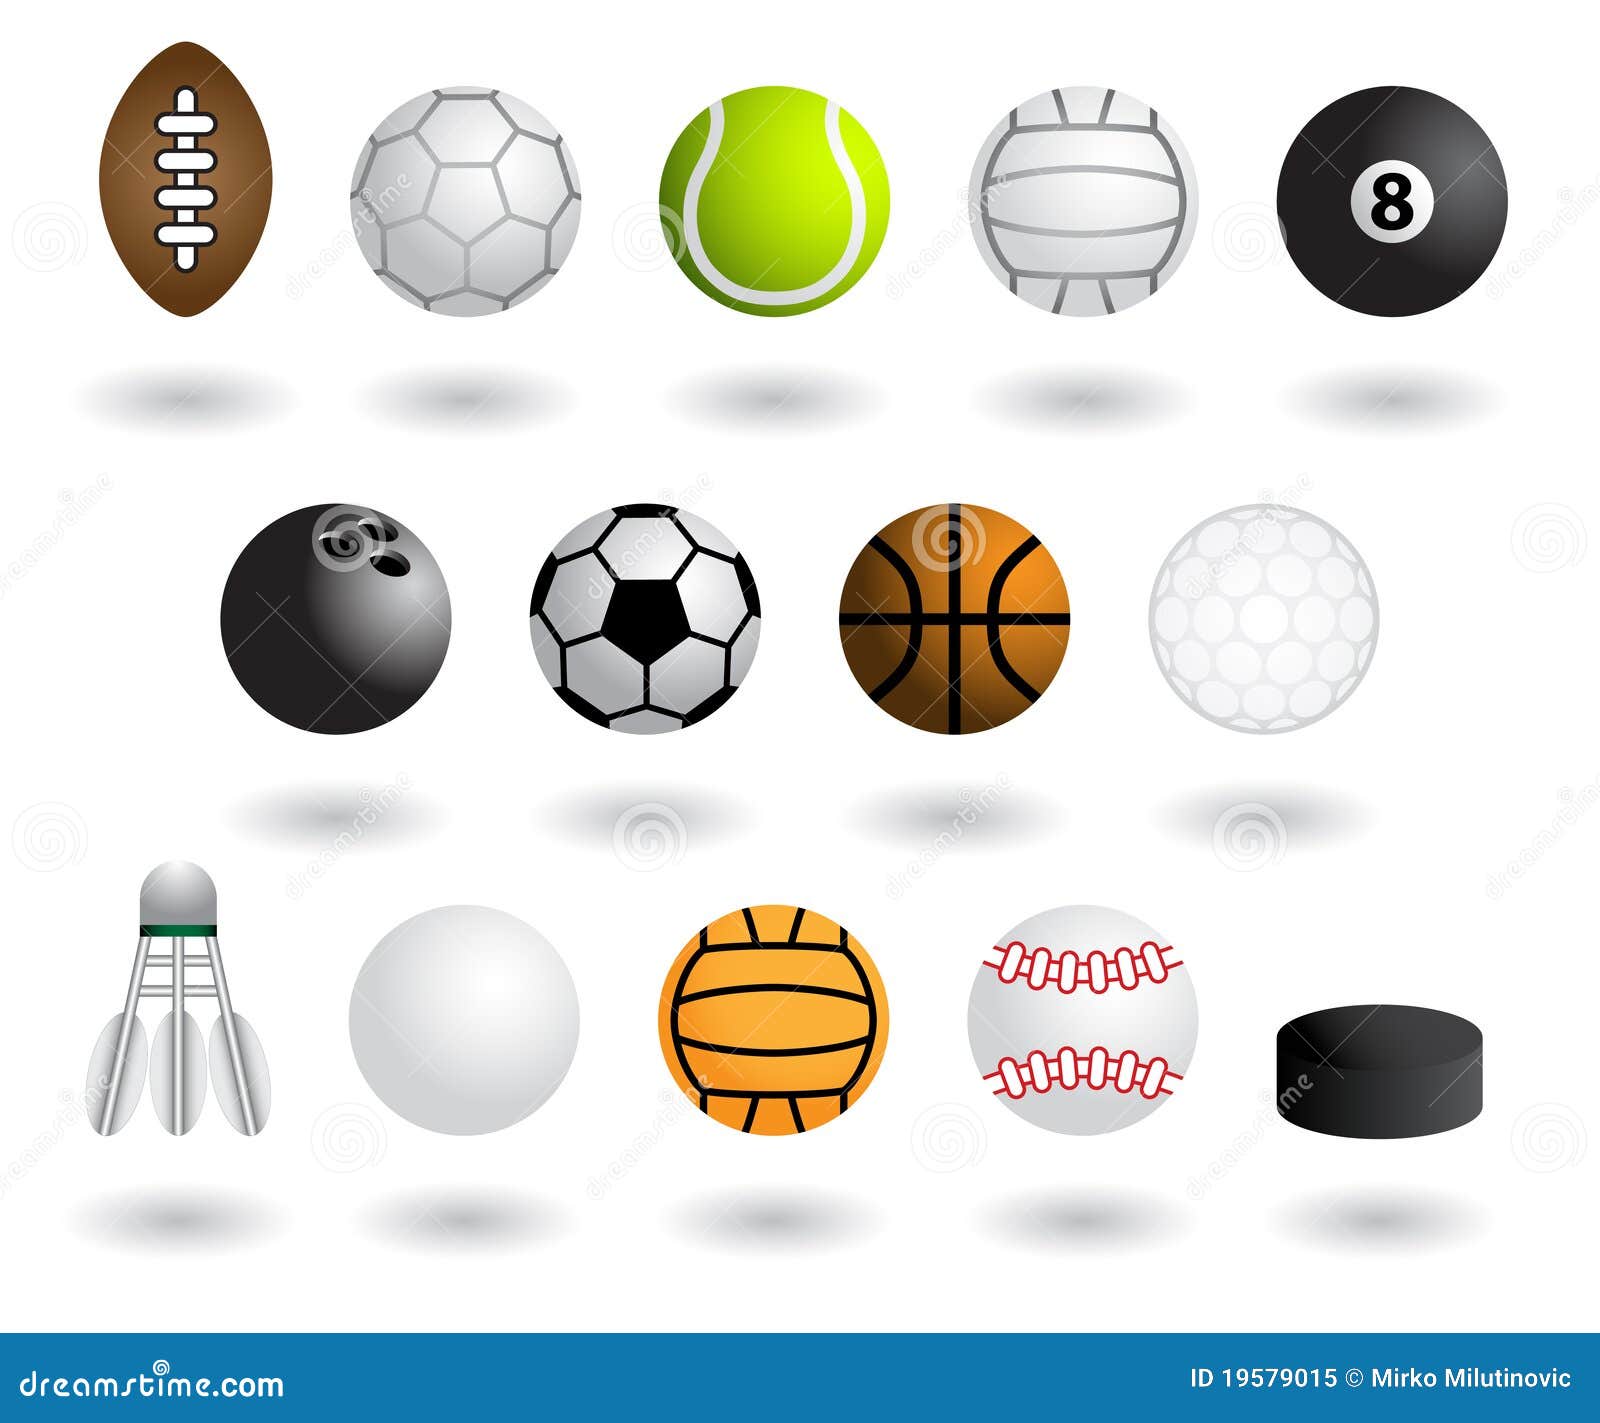 free clipart of sports equipment - photo #32